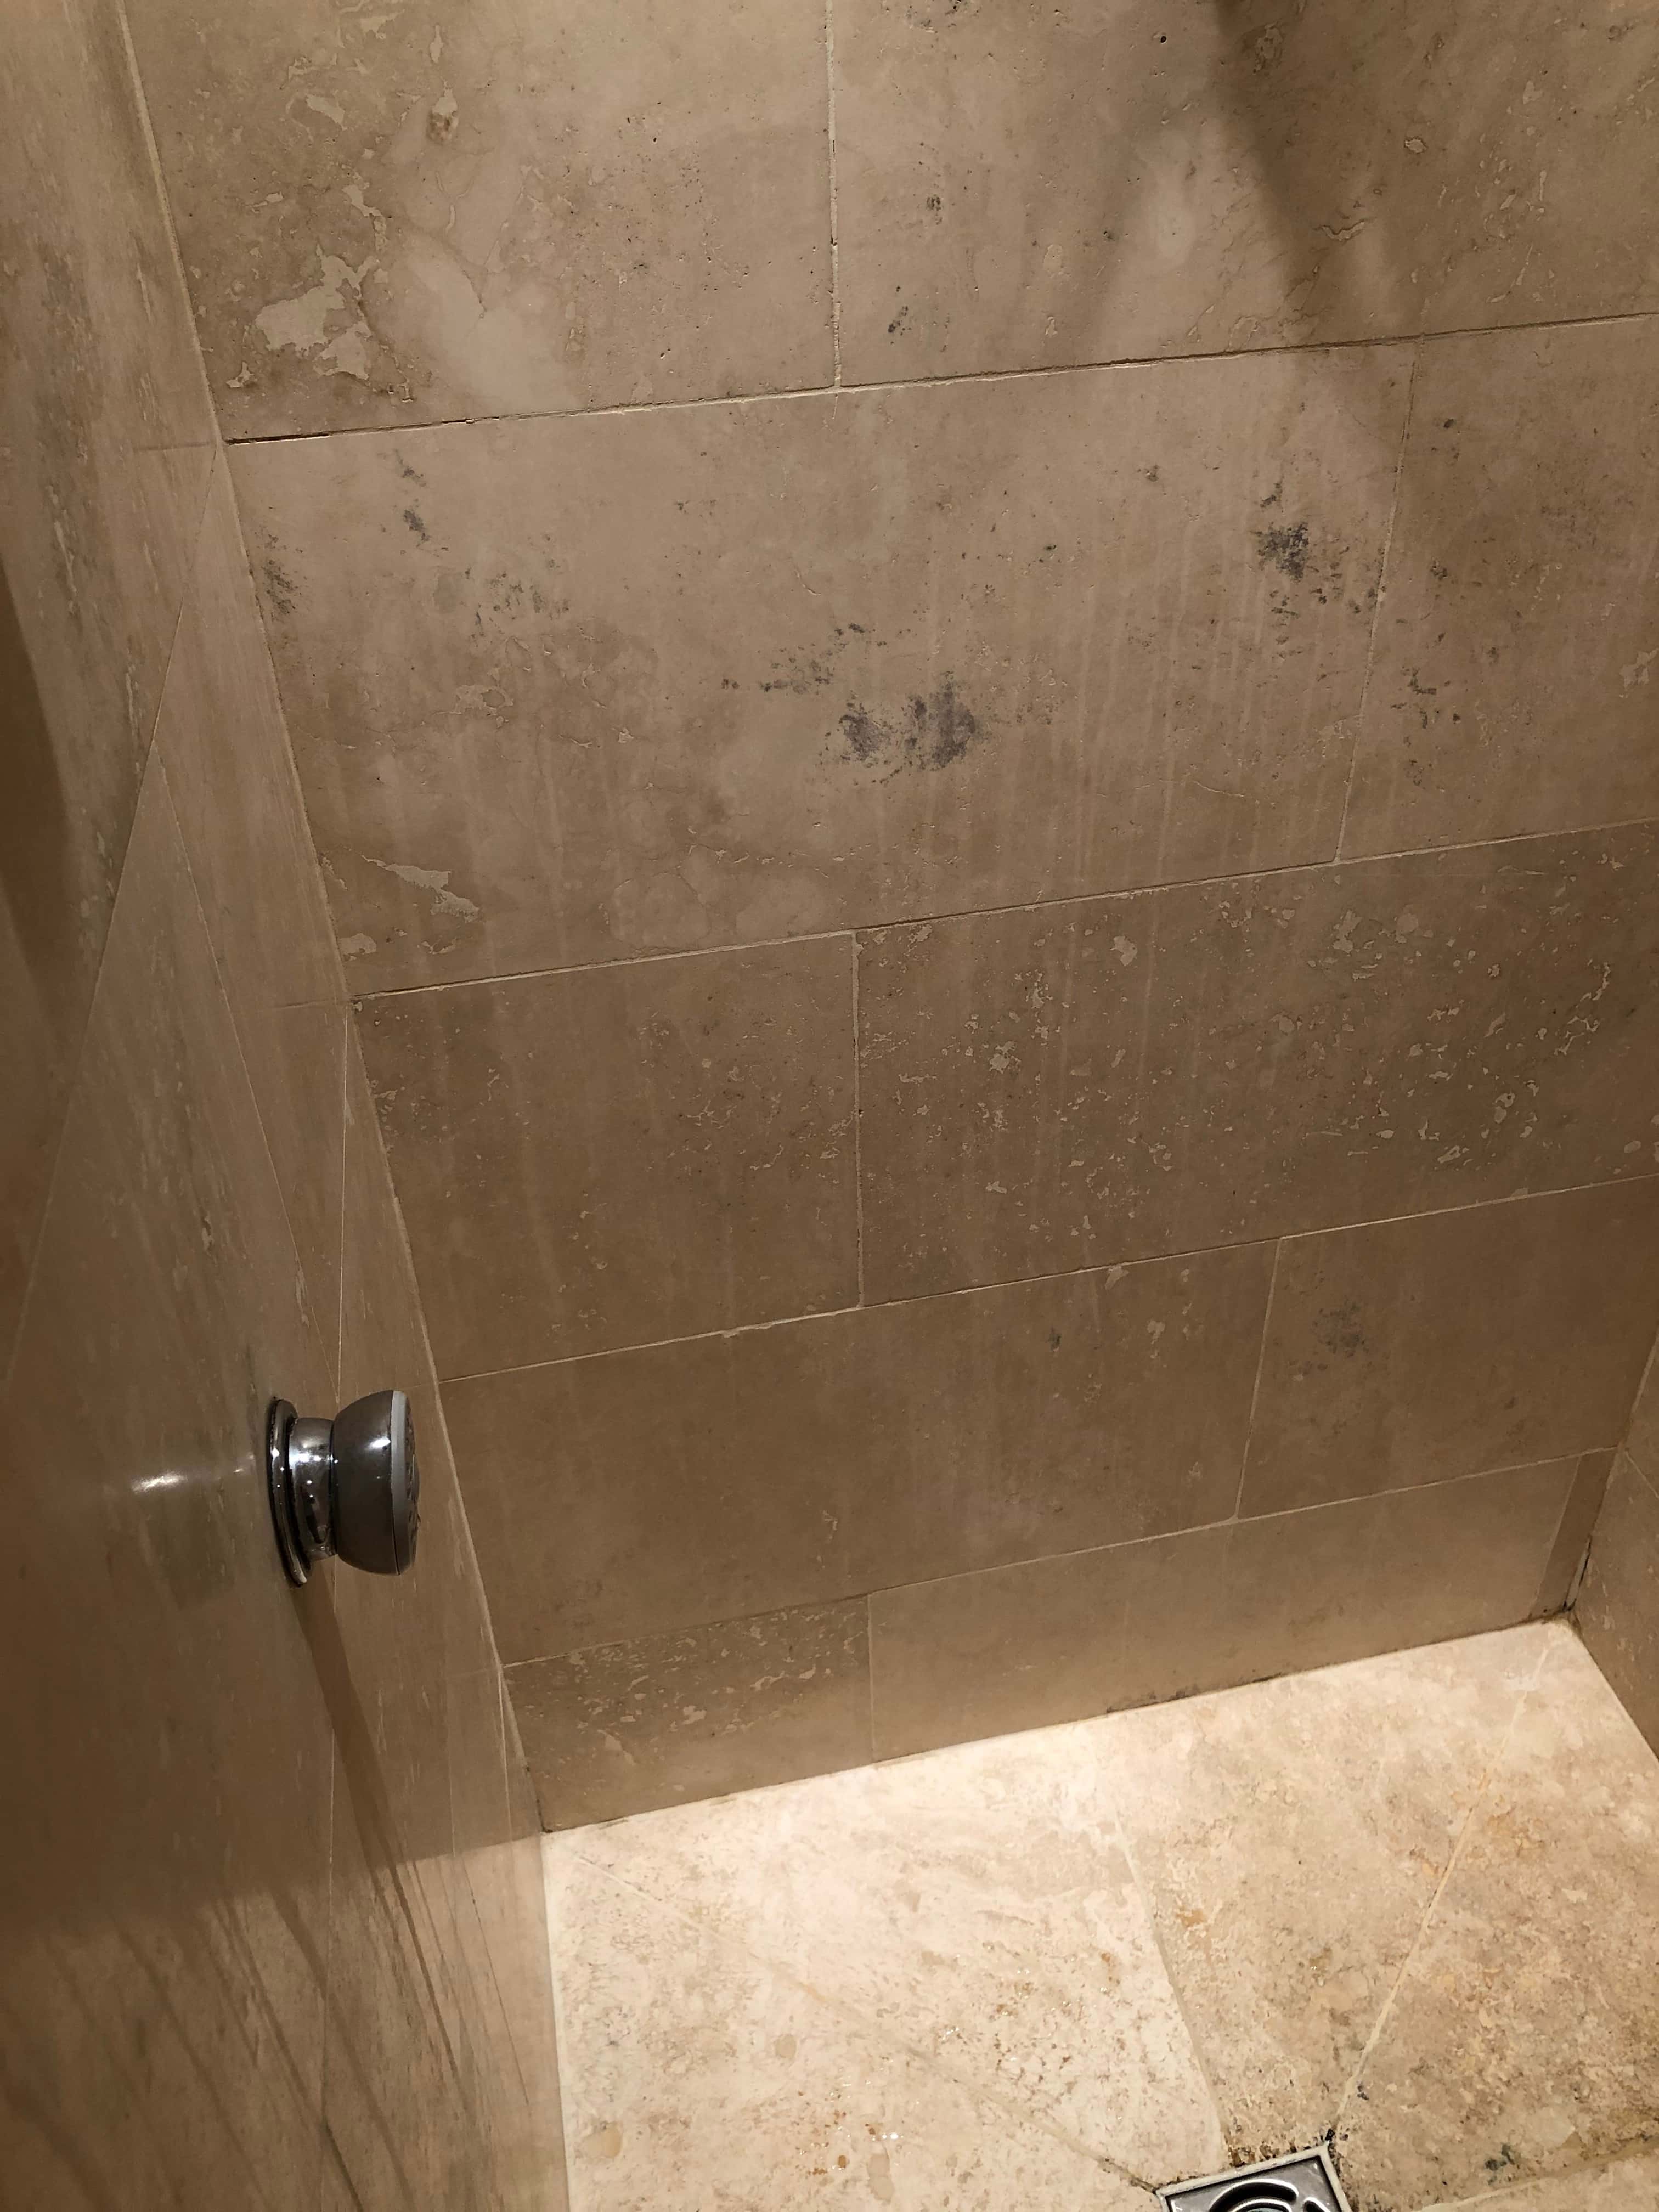 20 Year Old Travertine Shower Cubicle Before Renovation Hale Barns